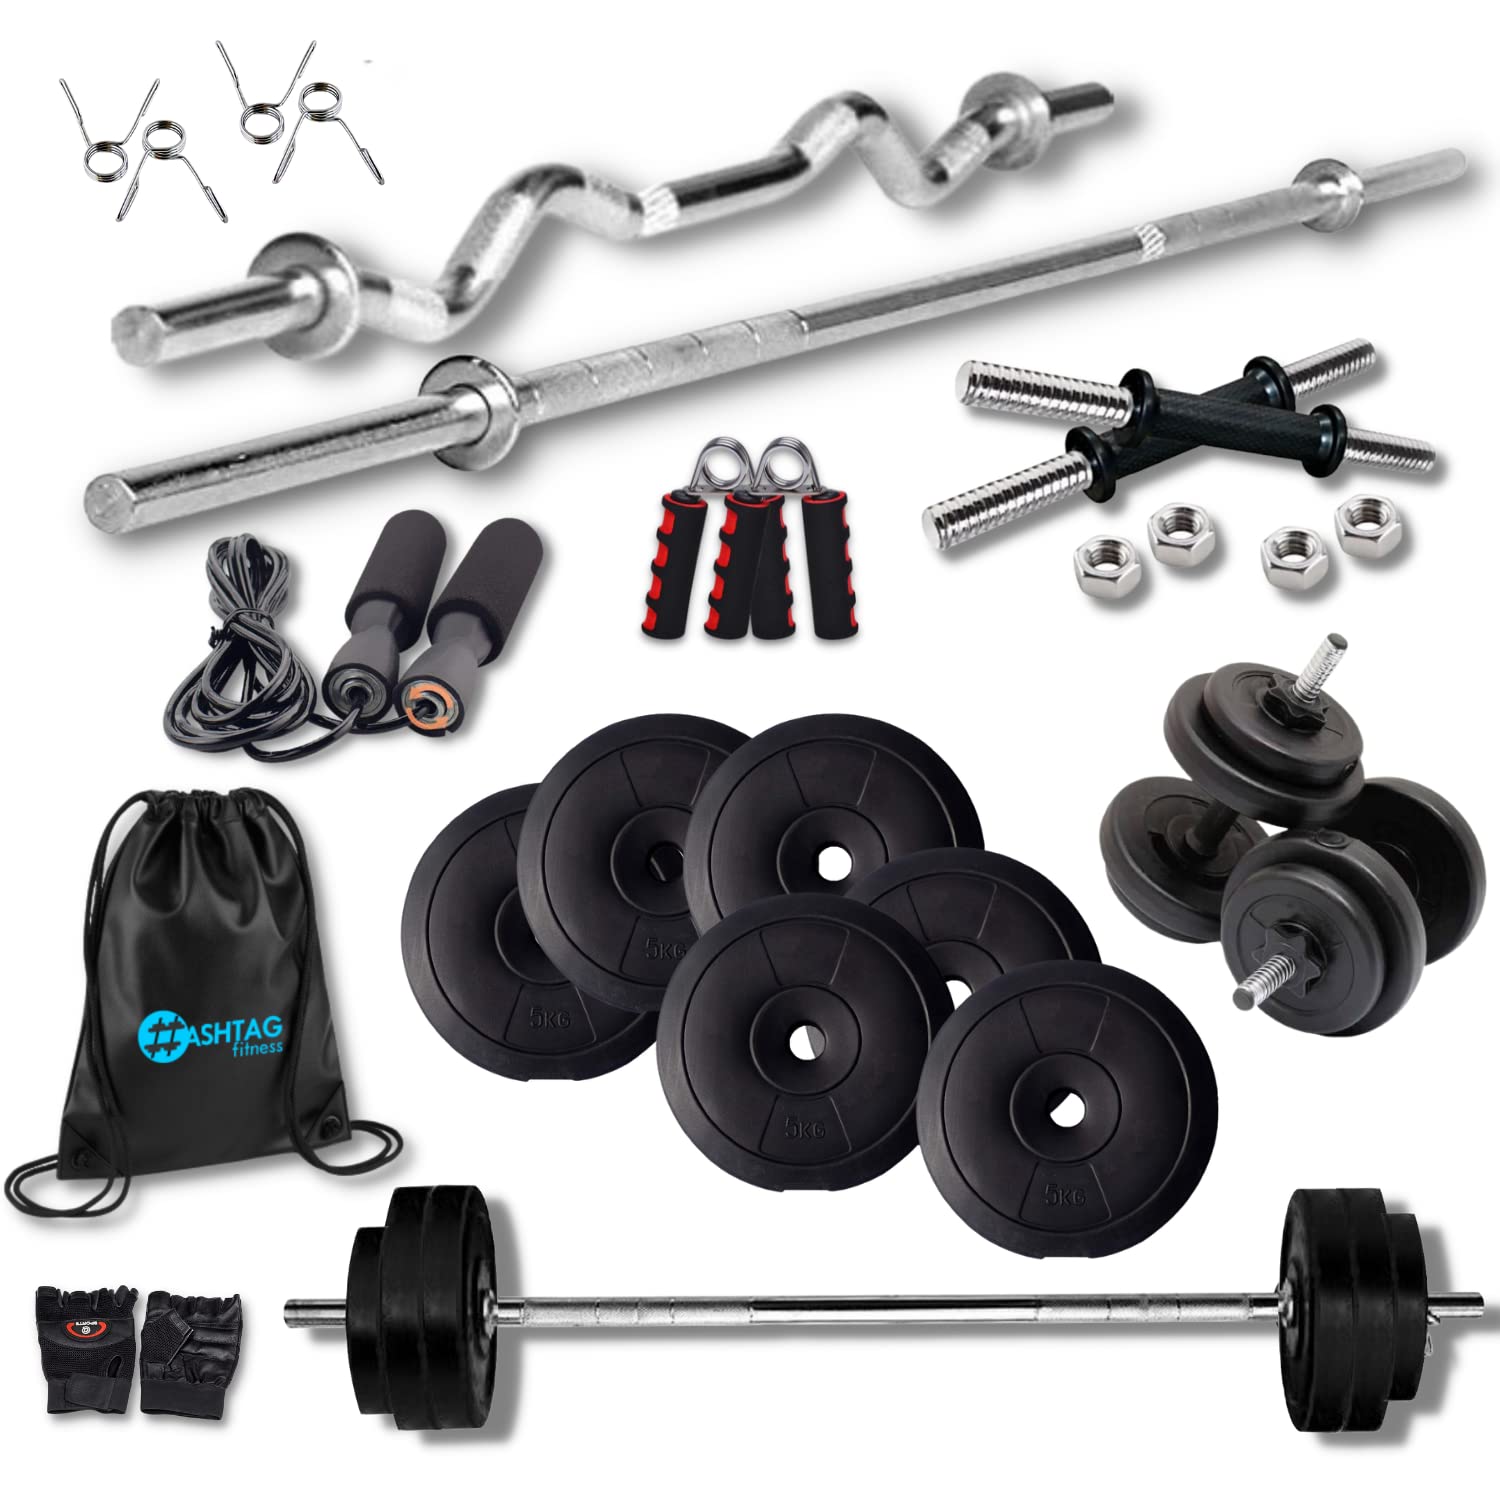 HASHTAG FITNESS 20 in 1 Bench with 50kg steel weight Home Gym & Fitness kit